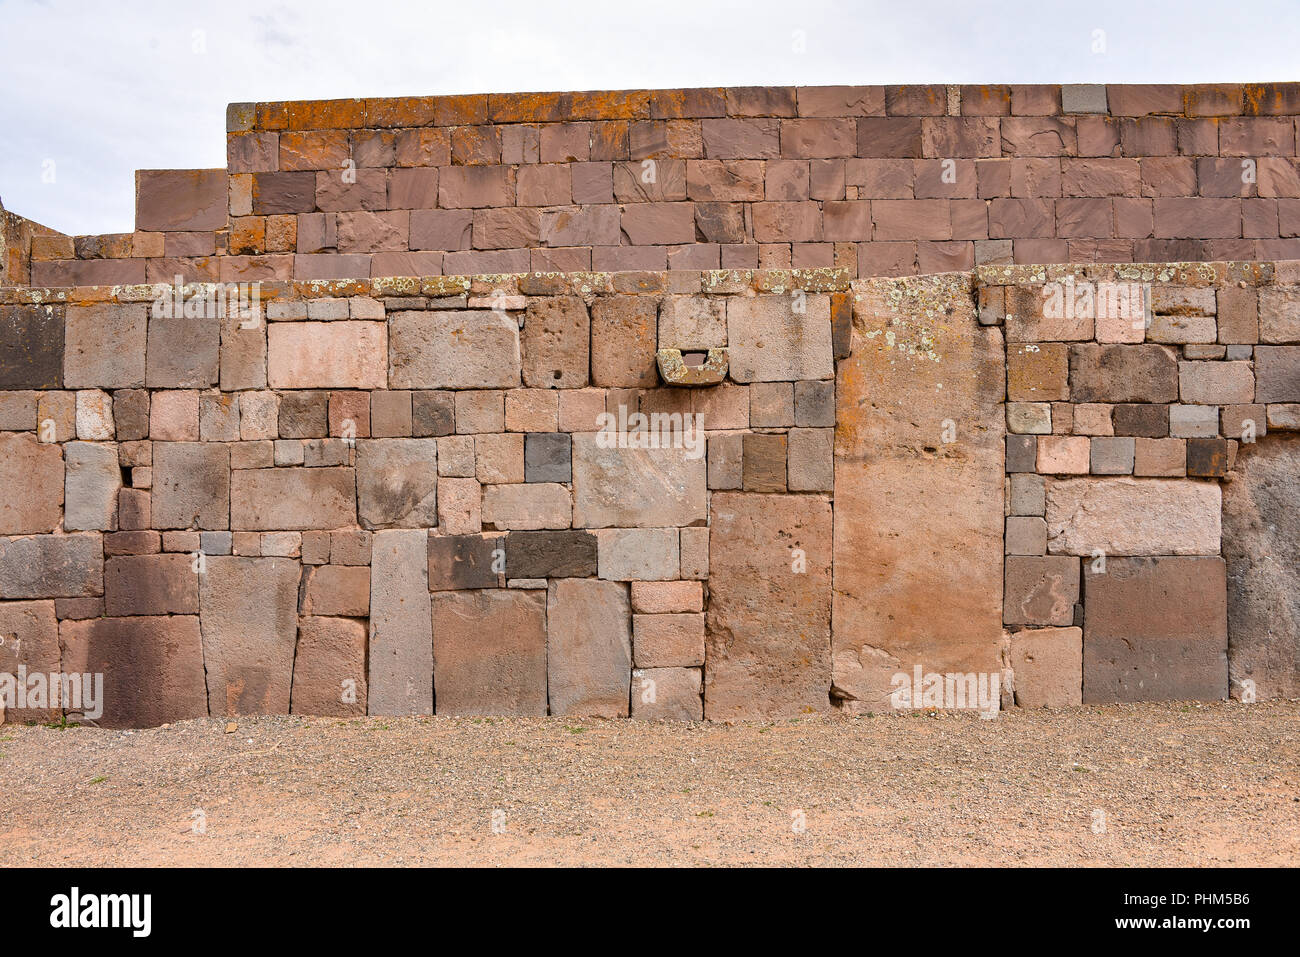 Intricately constructed stone wall structures at the Tiwanaku archaeological site, near La Paz, Bolivia Stock Photo